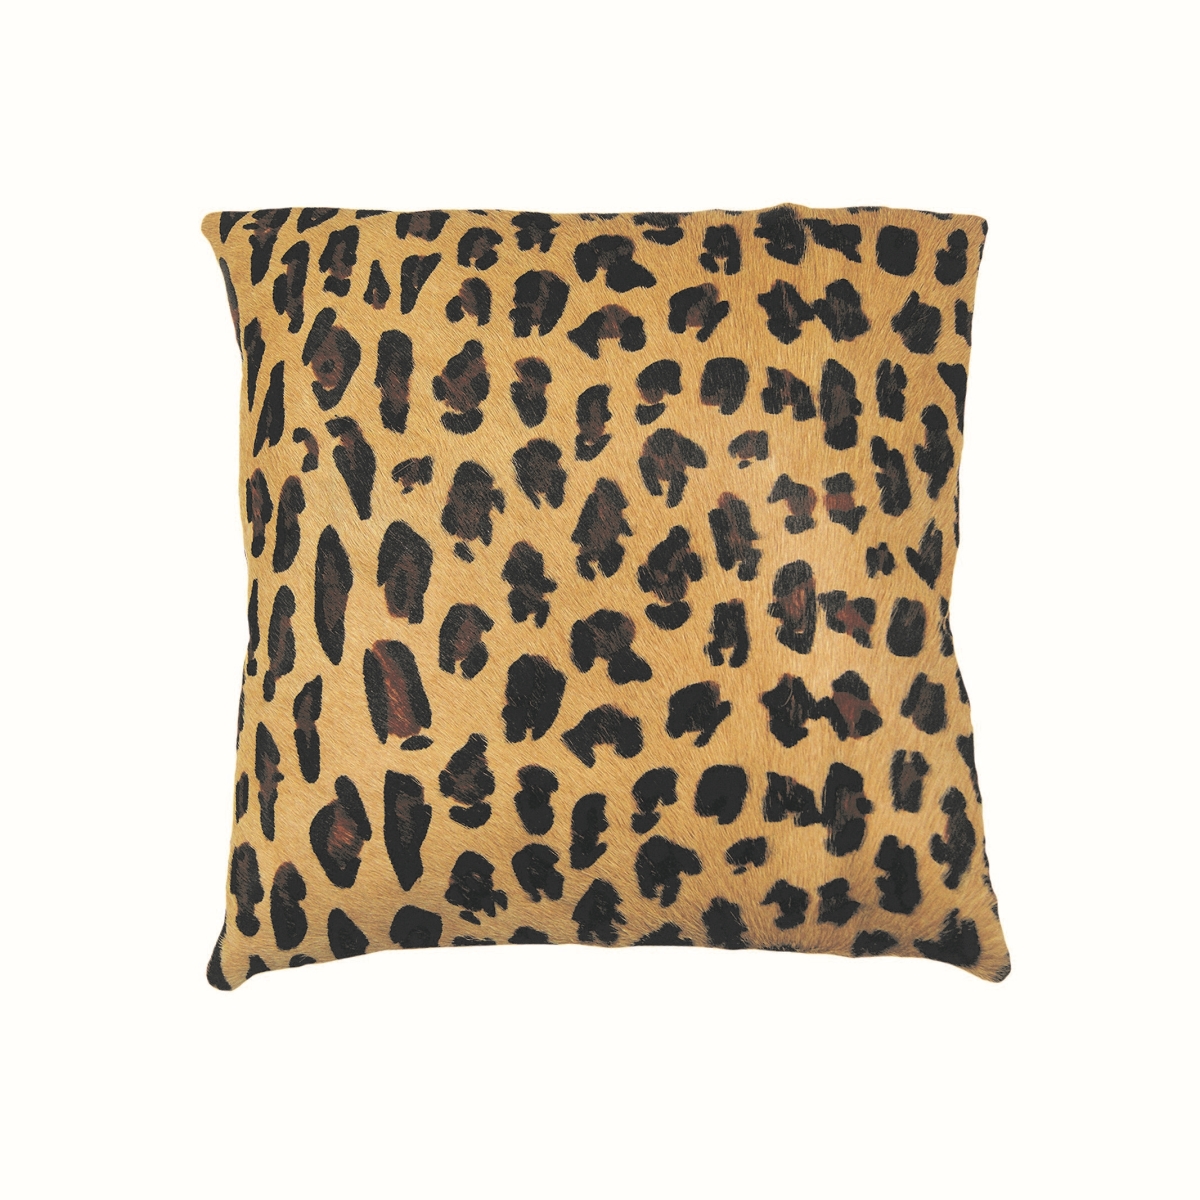 676685000057 18 X 18 In. Torino Togo Cowhide Pillow - Leopard